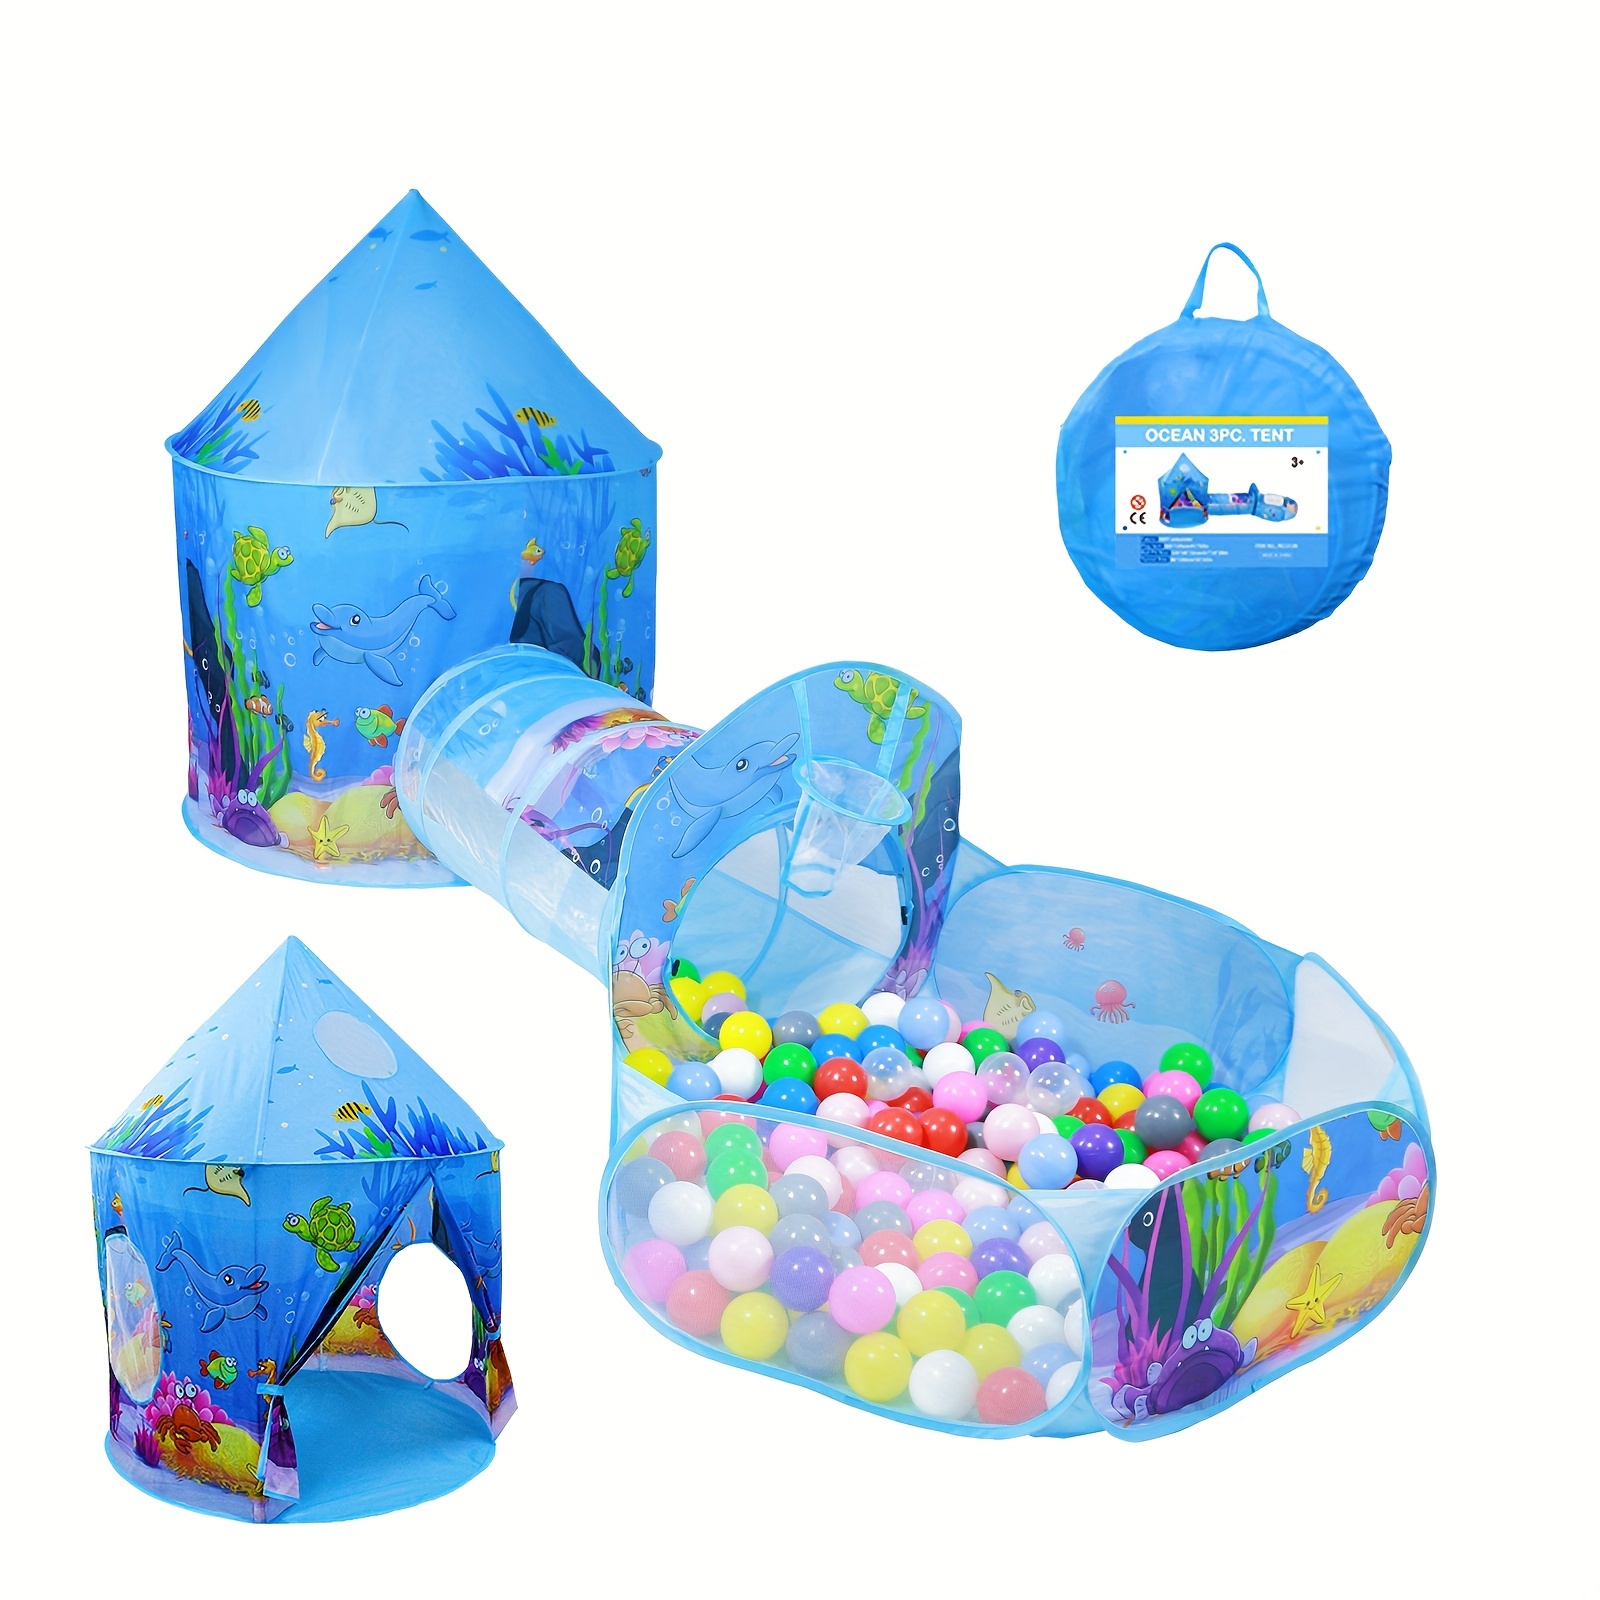 

Ball Pit, Toy Tent 1-3, Tunnel 1-3 Gifts For 1 Year Old Boys Girls (no Ball)